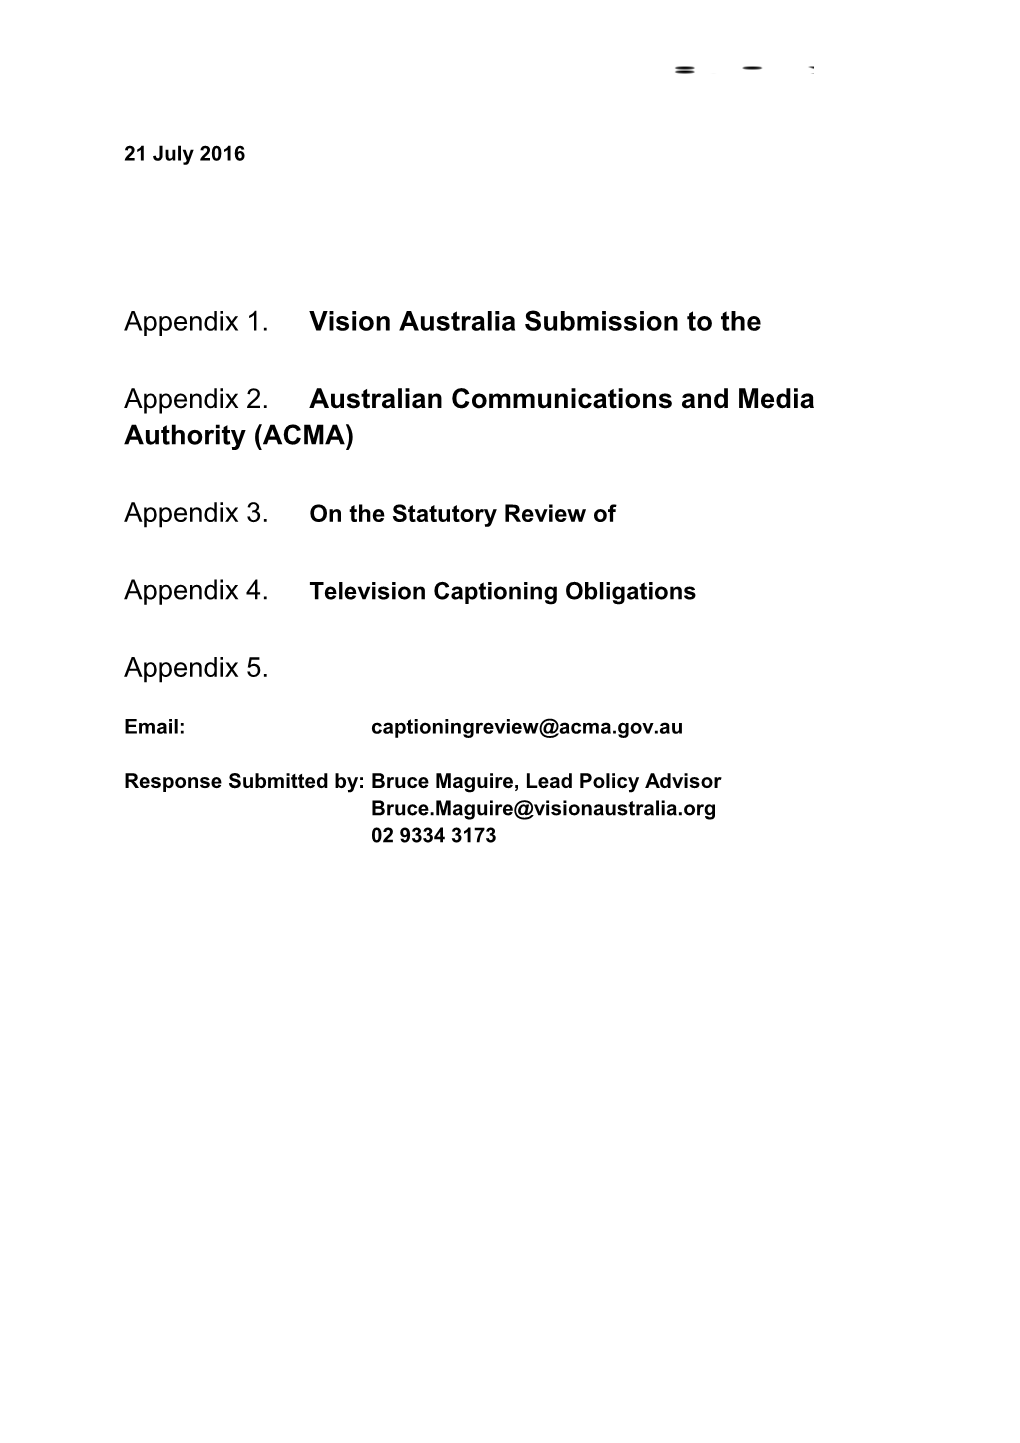 Vision Australia Submission to The